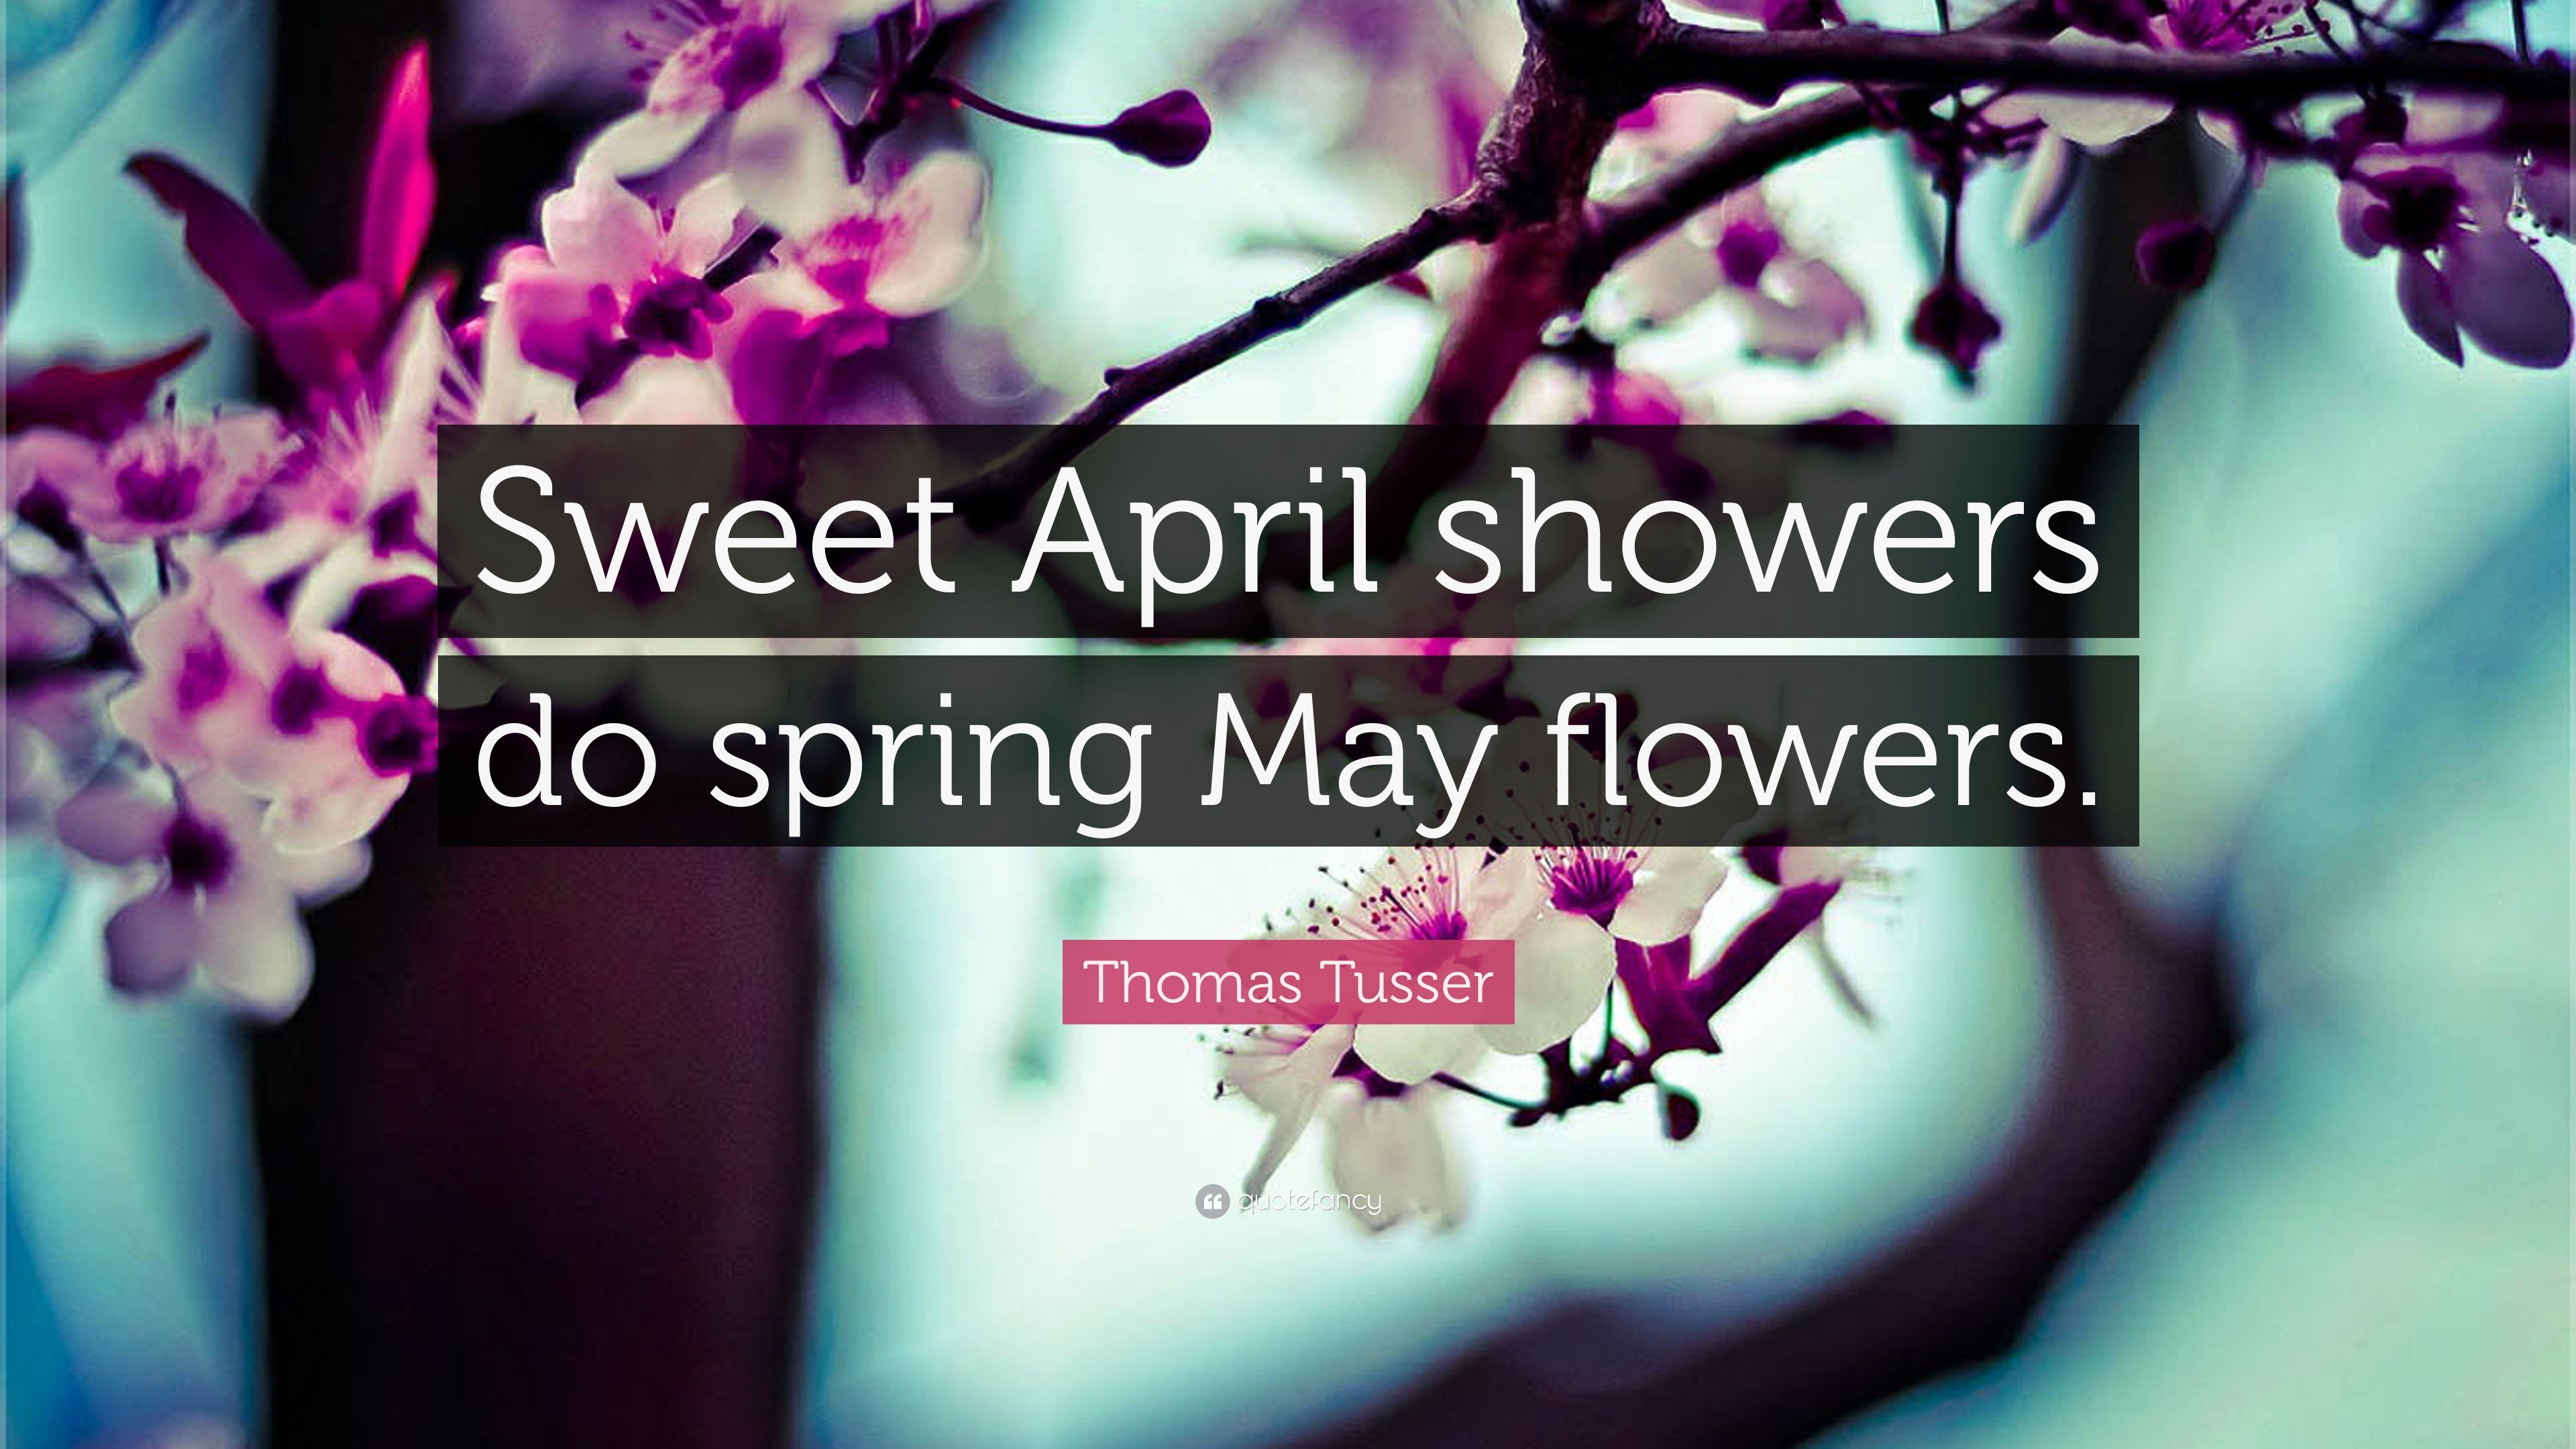 Thomas Tusser Quote: “Sweet April showers do spring May flowers